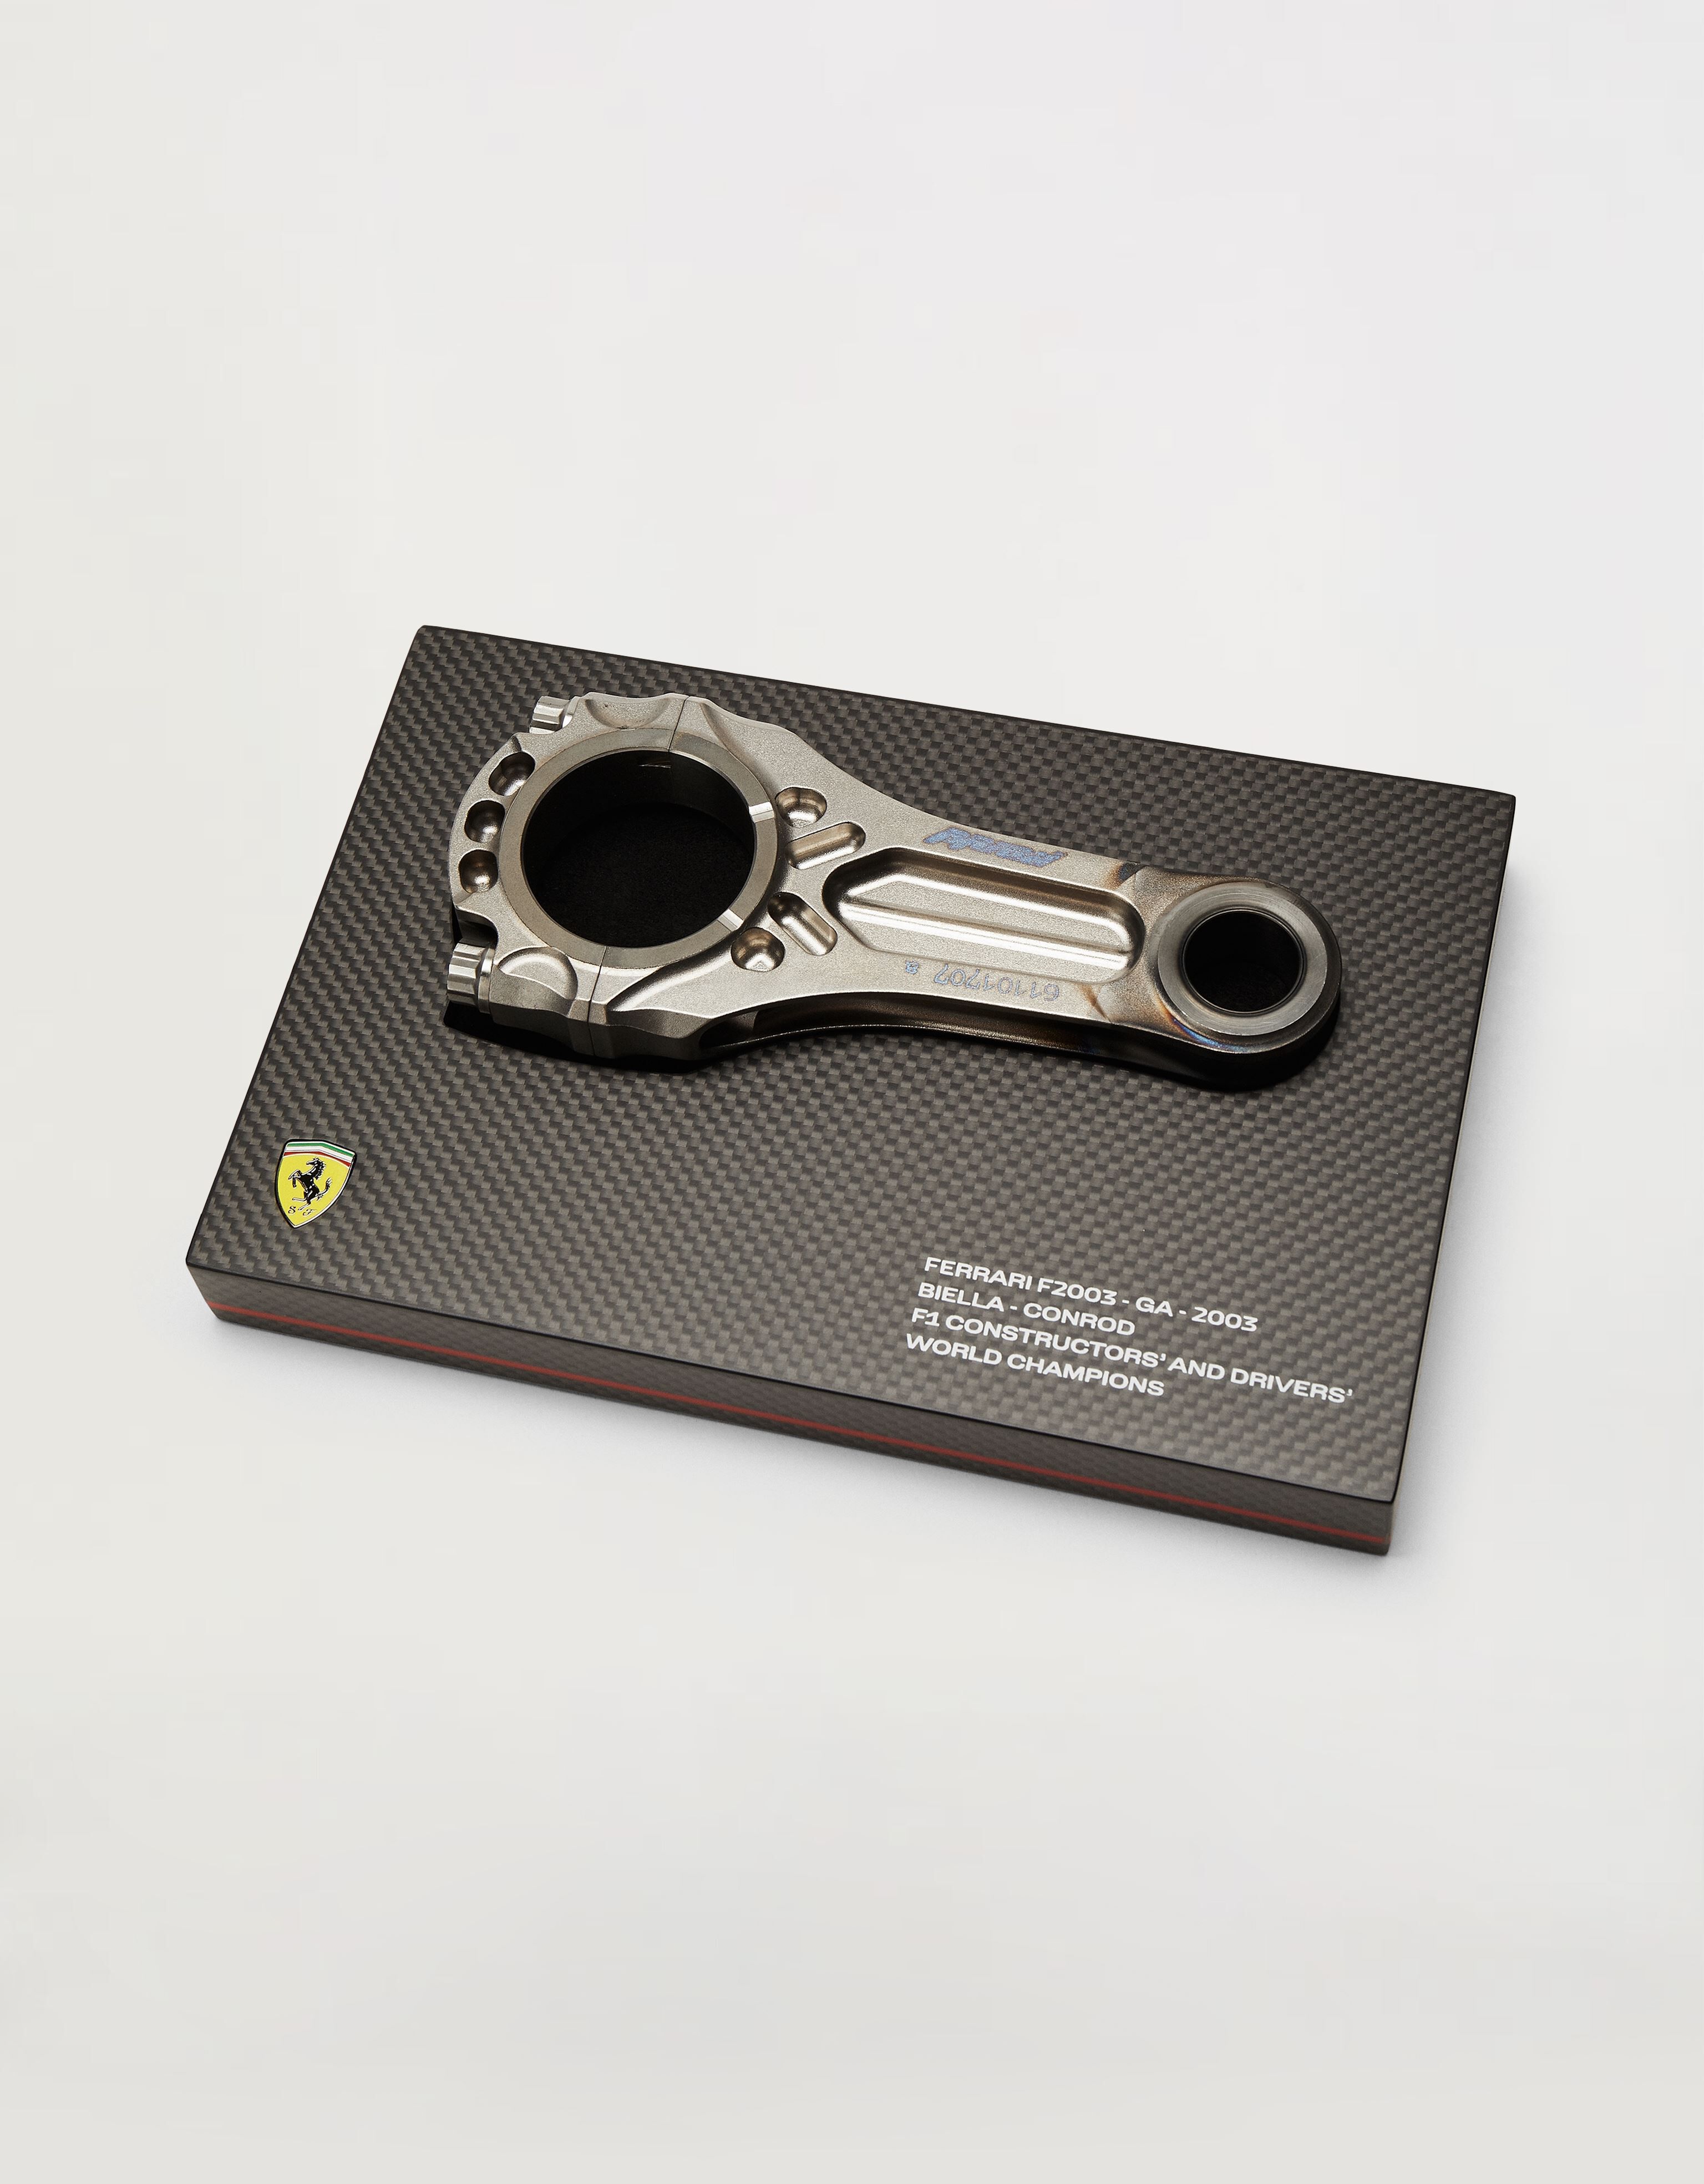 Ferrari Original piston from the F2003, winner of the 2003 Constructors' and Drivers' Championships 黑色 47671f